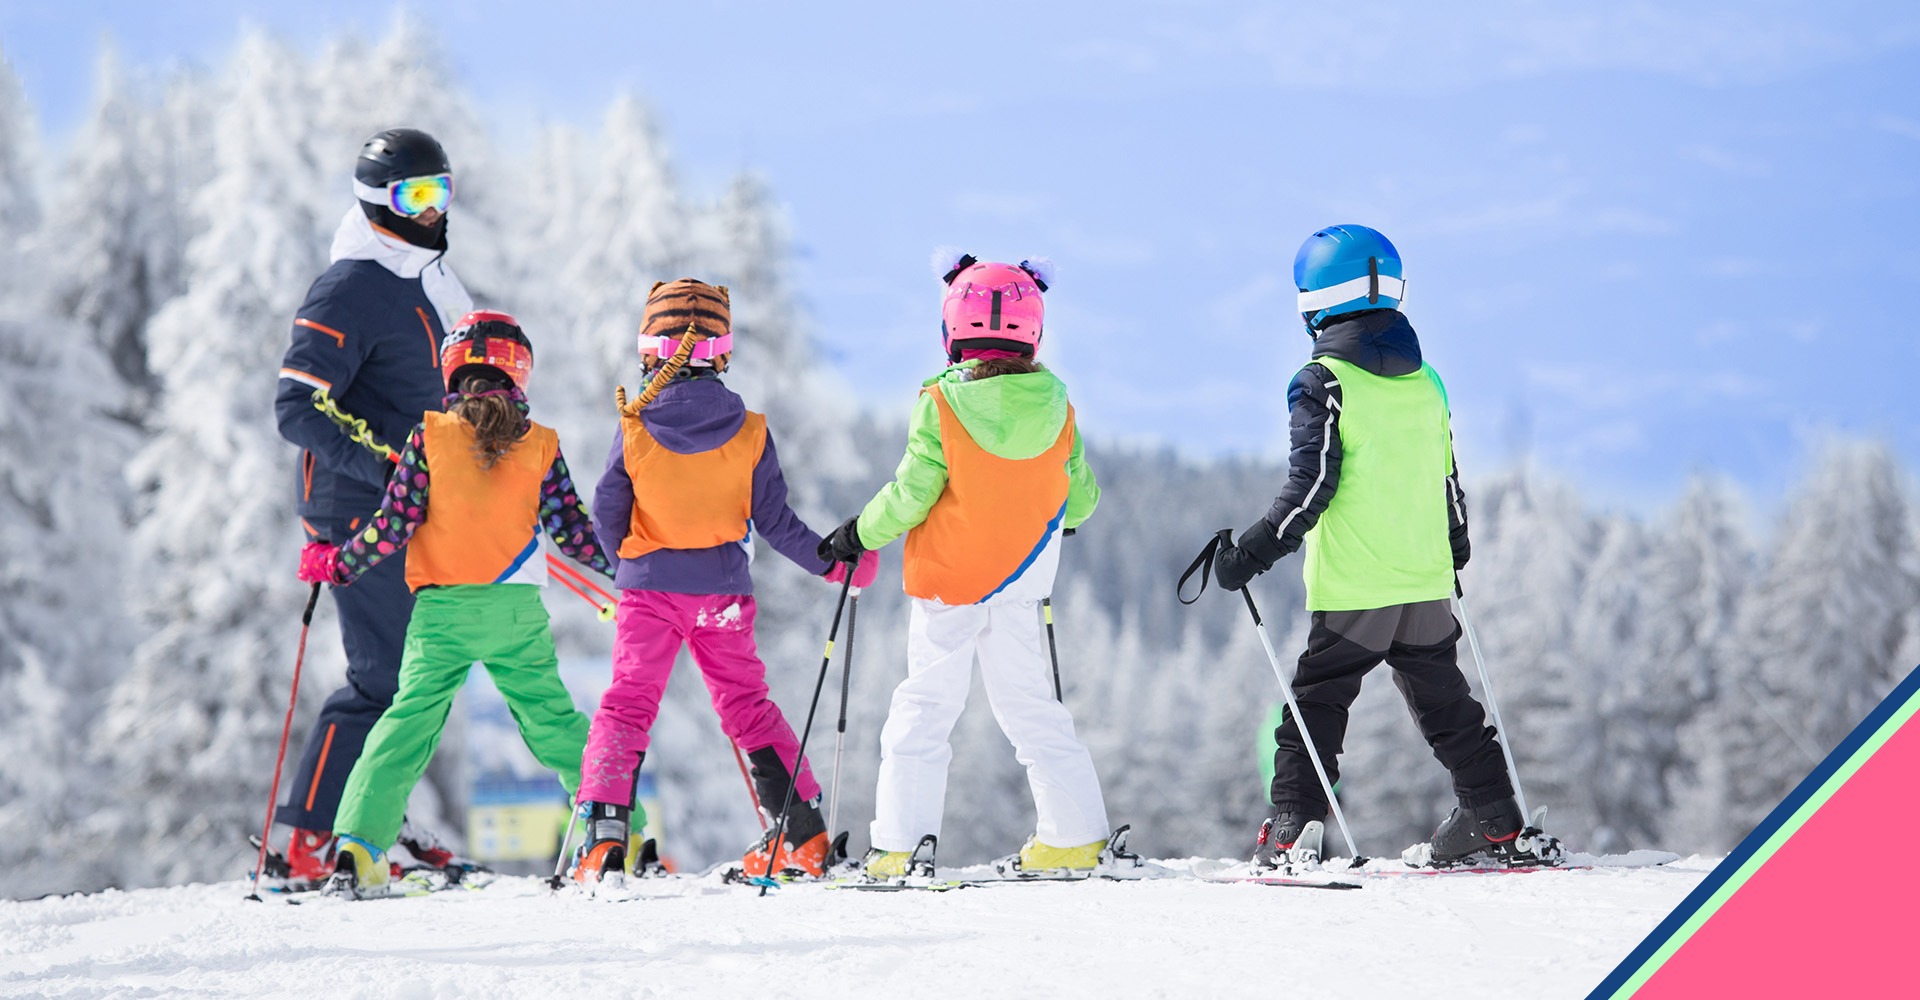 Style Meets Snow: The Ultimate Guide to Stylish School Ski Trips